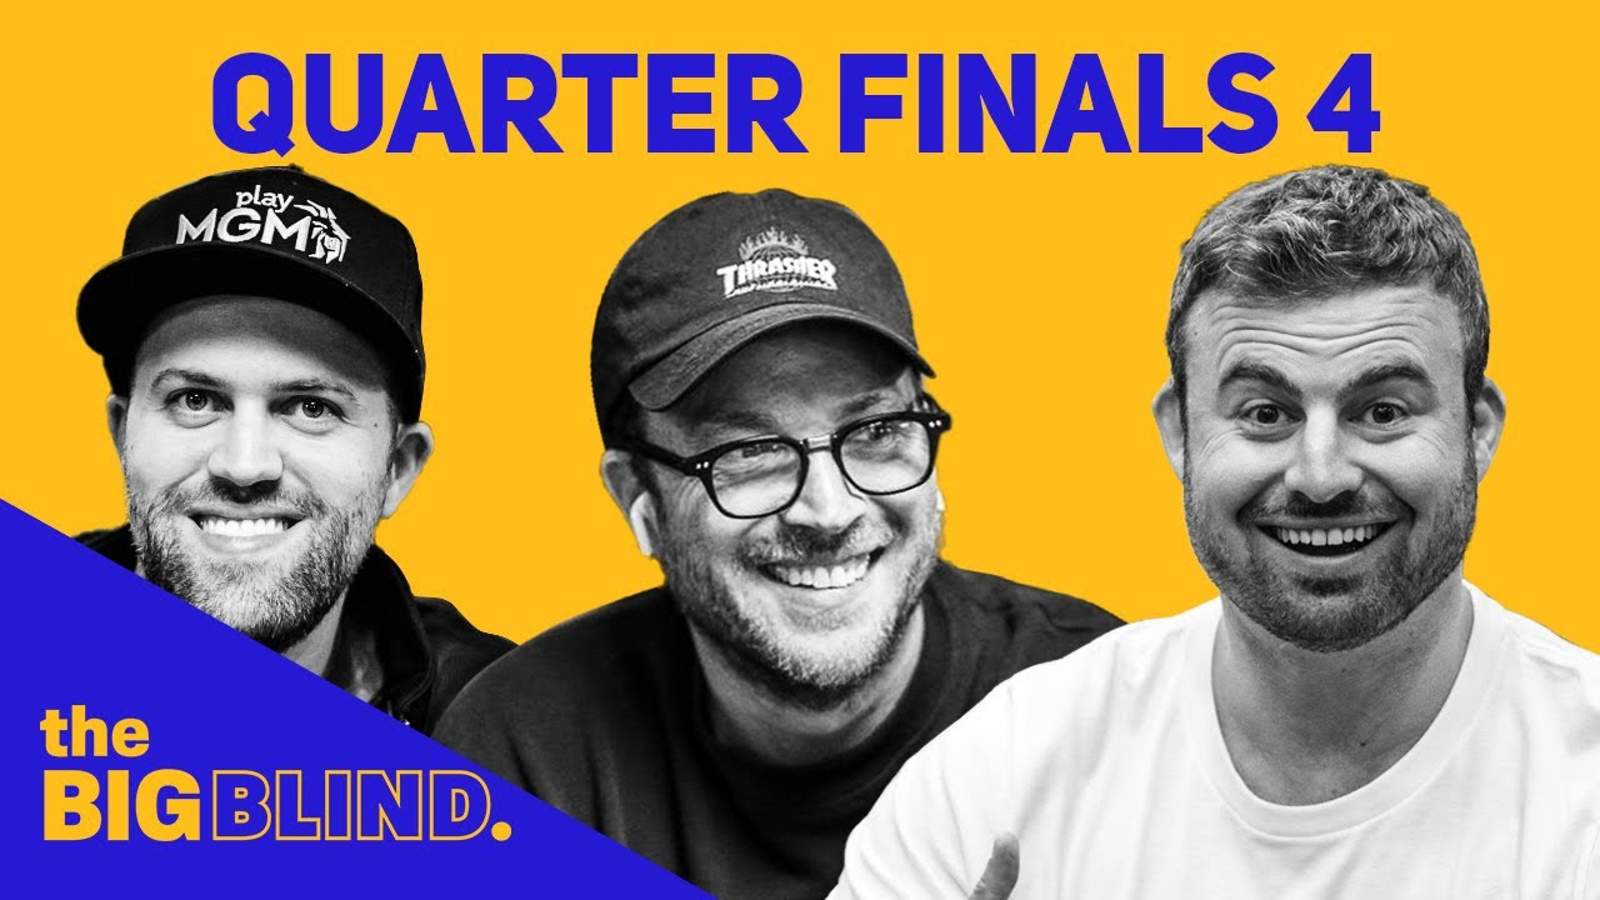 Rewatch Quarterfinals - Game 4 of The Big Blind on YouTube and Facebook